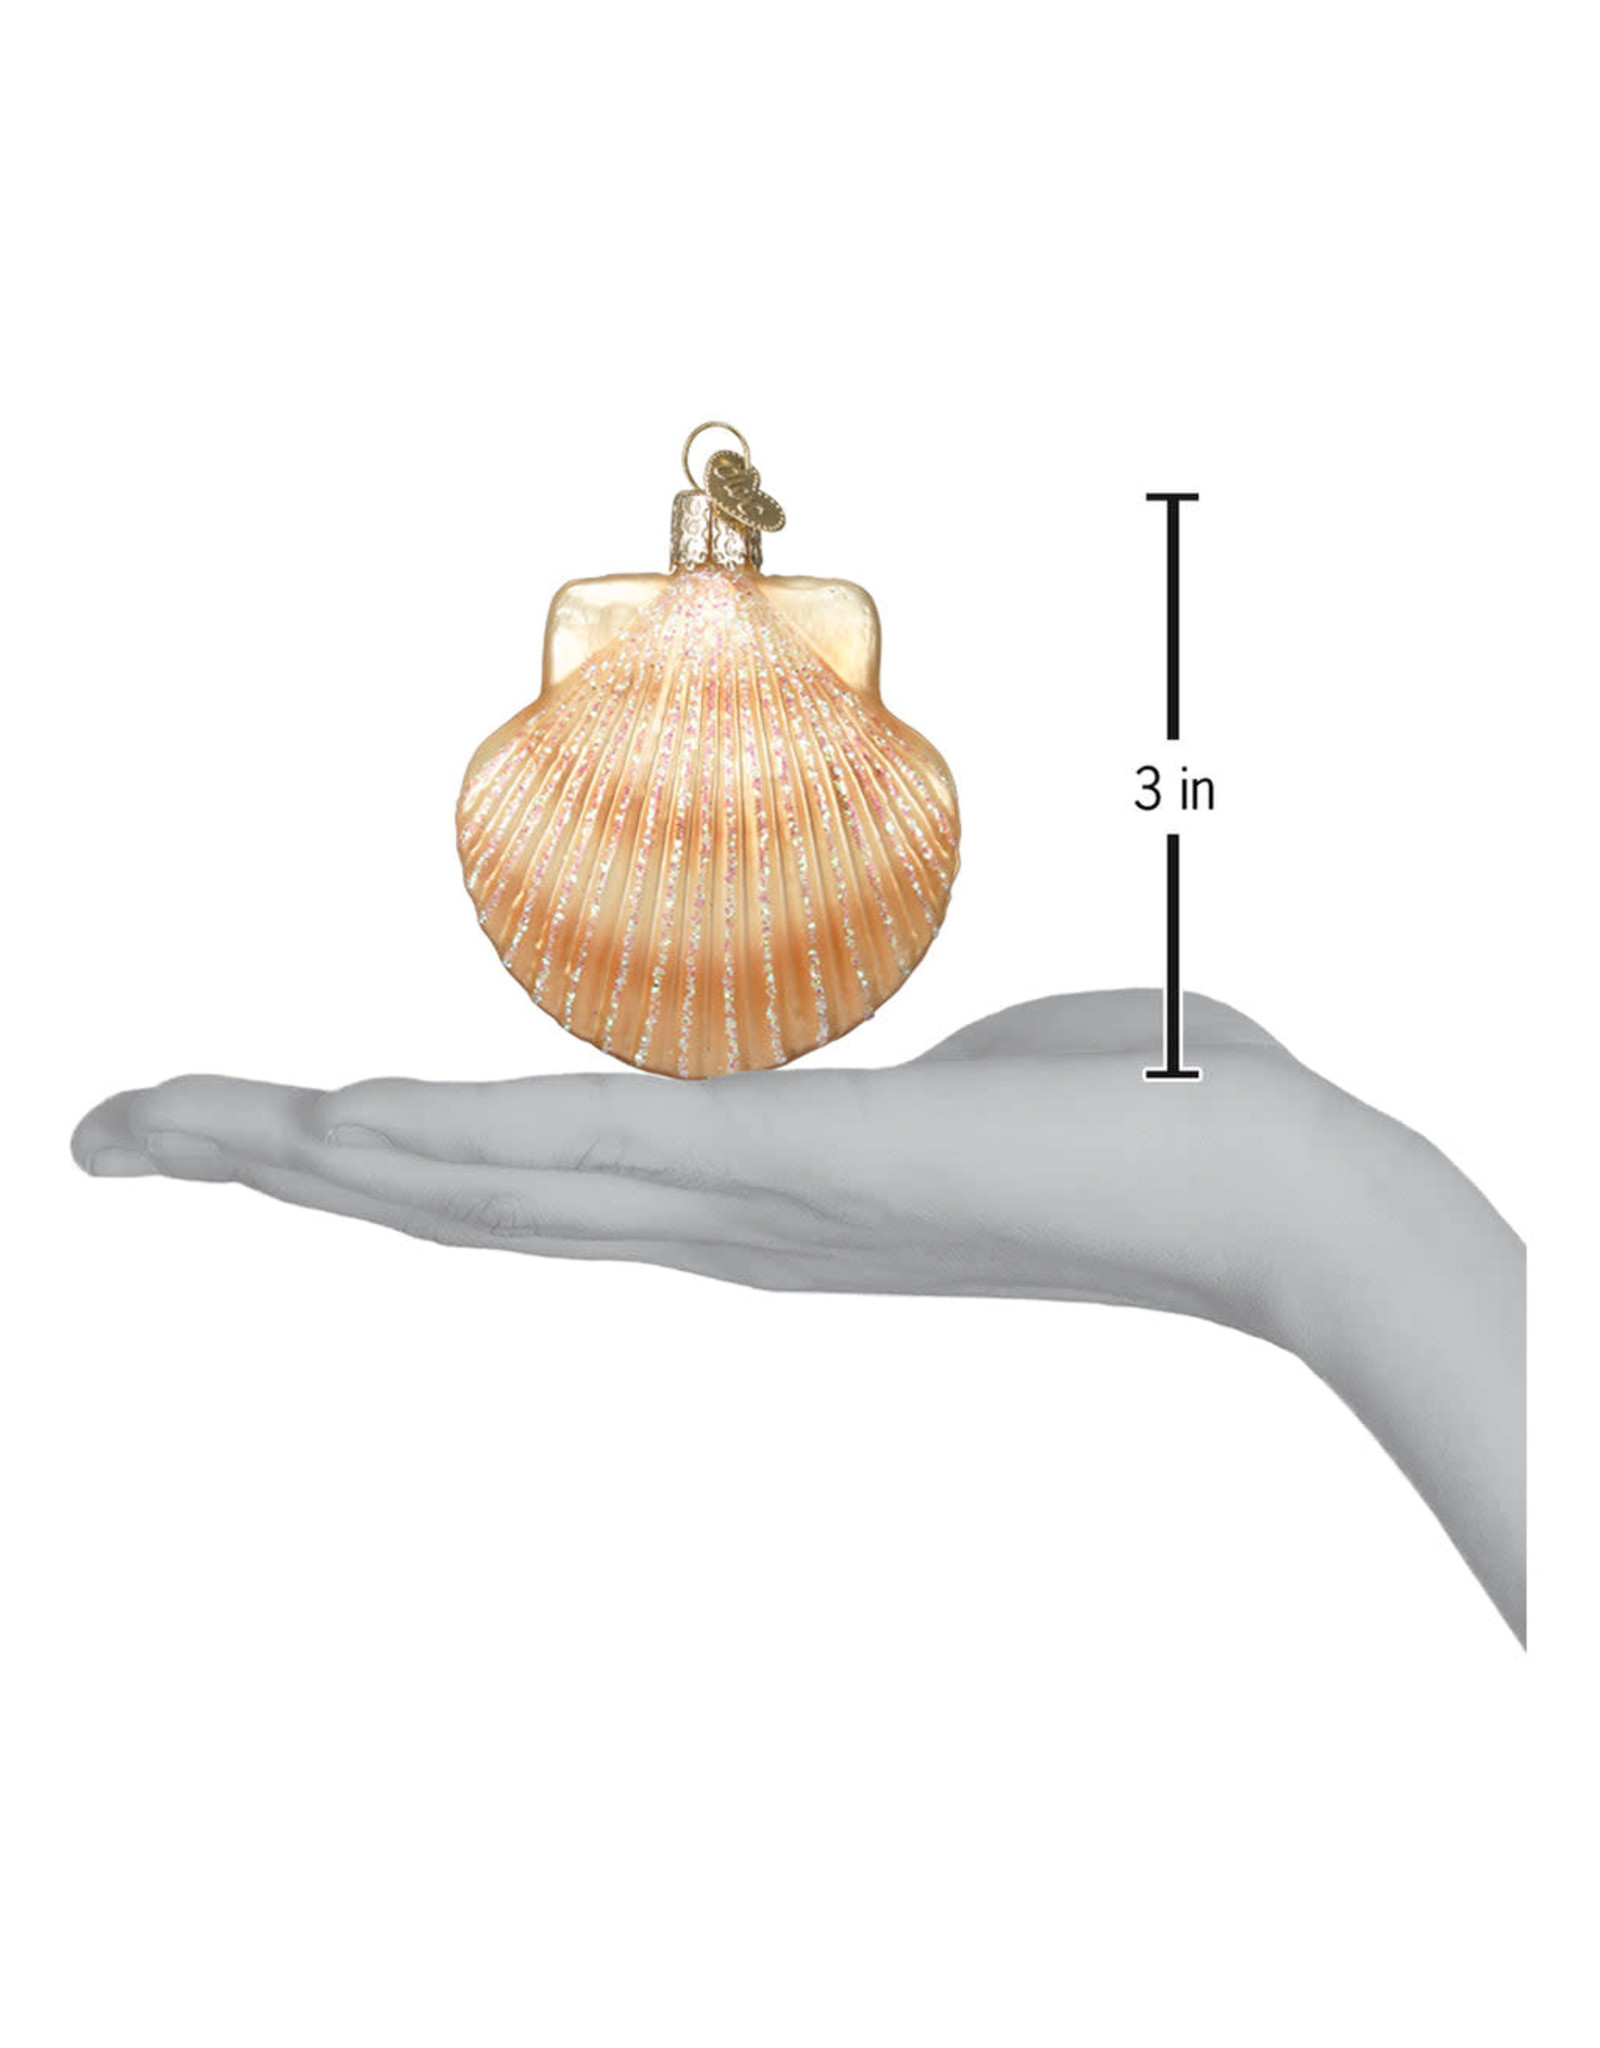 Old World Christmas Scallop Clam Shell Ornament